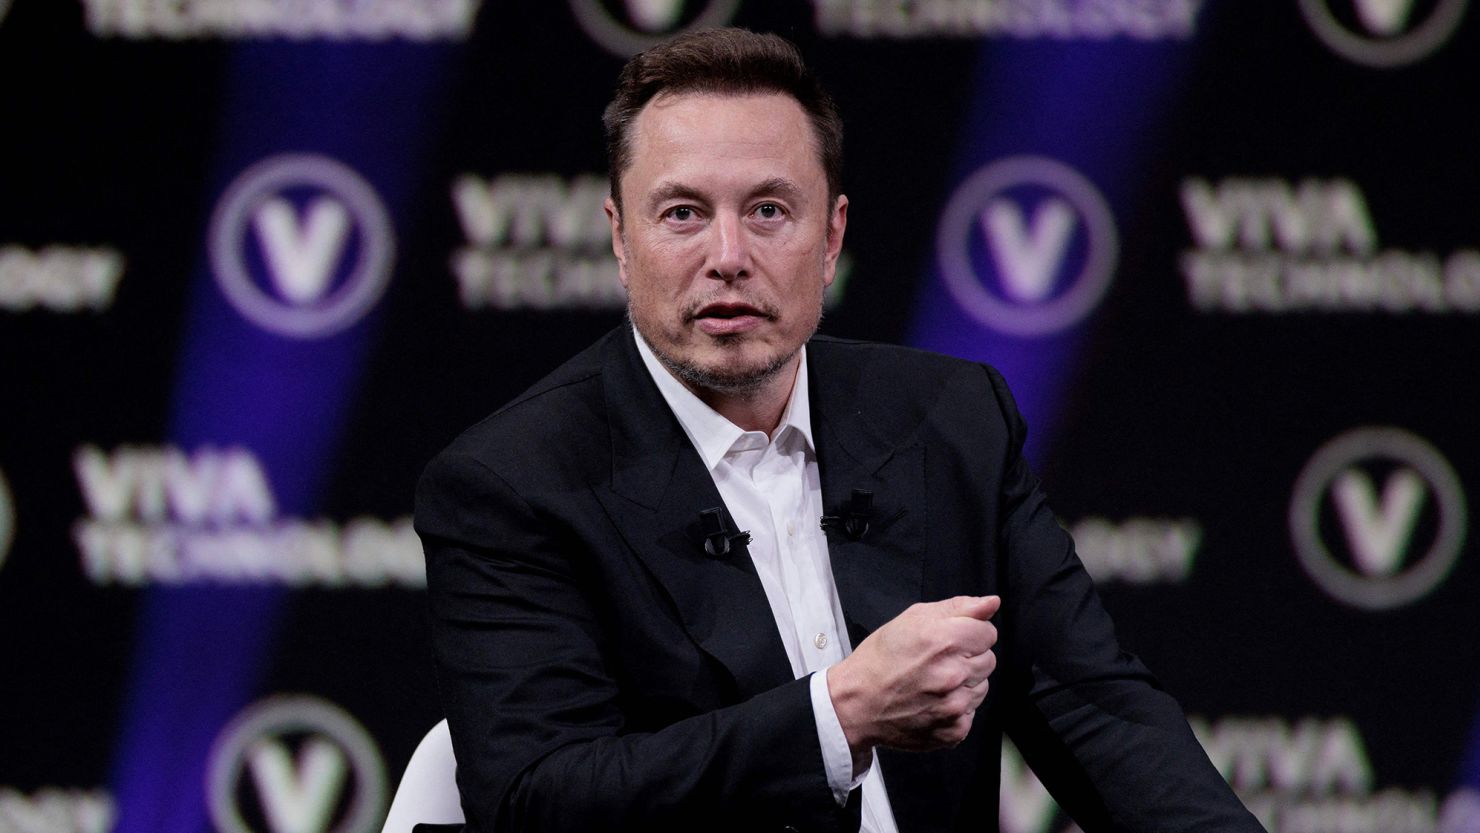 Elon Musk says the first human patient has received a brain